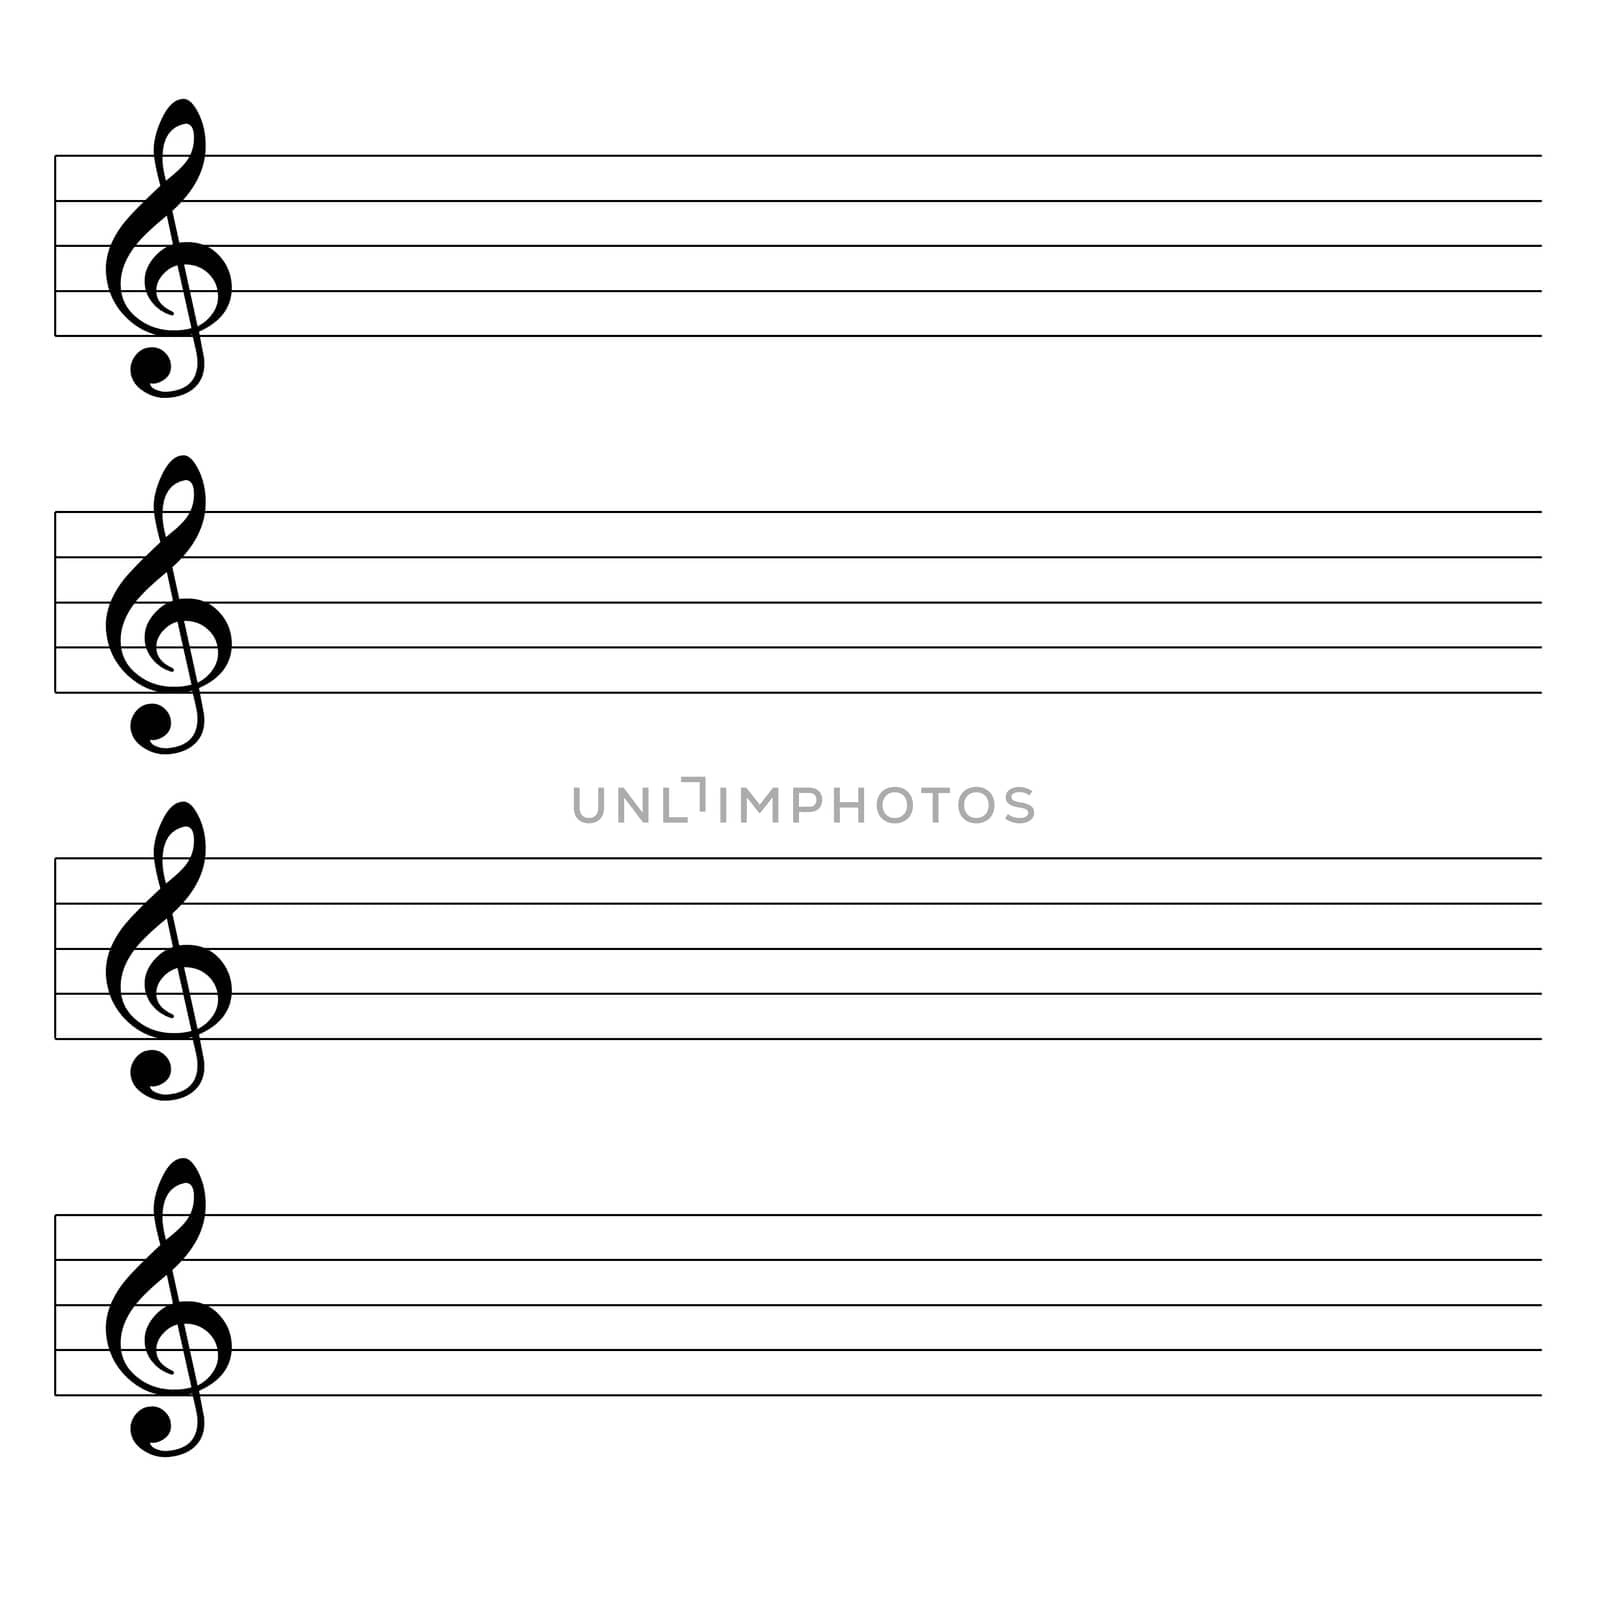 Blank sheet music isolated in white background